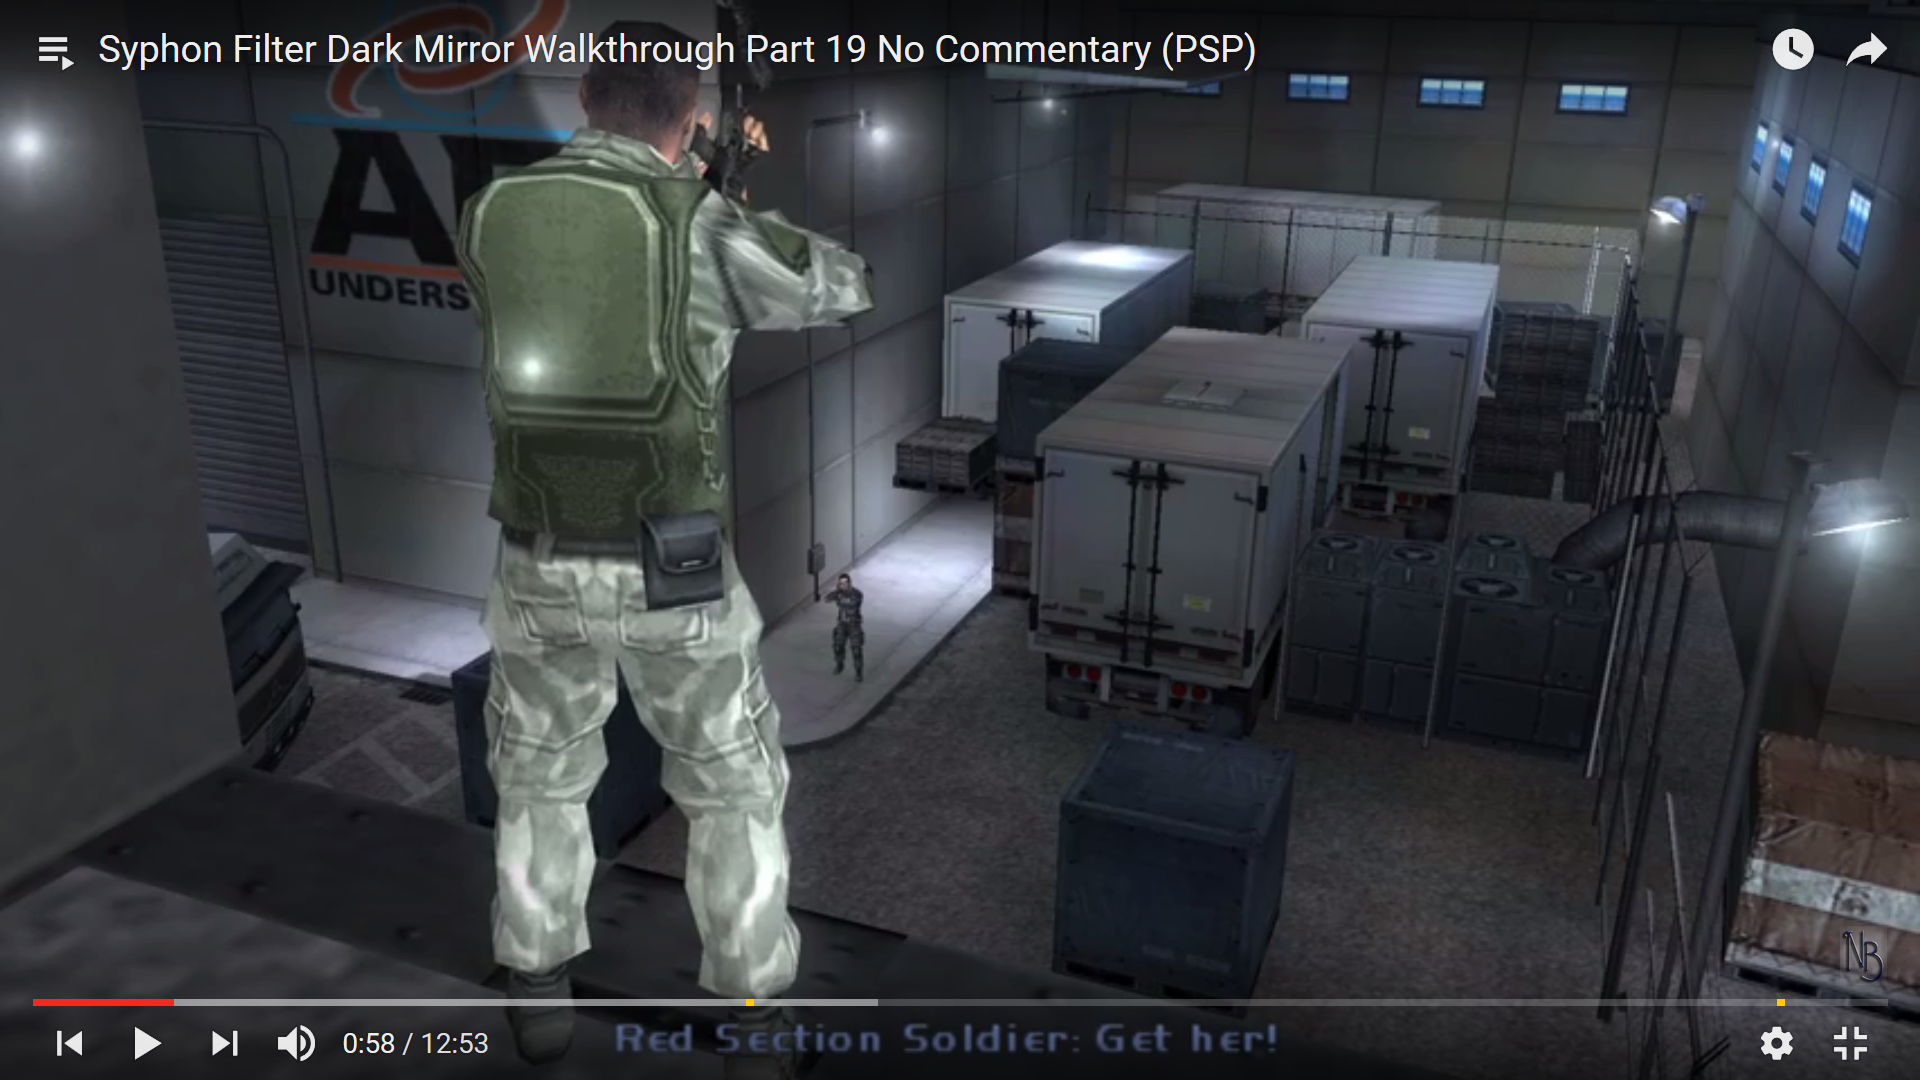 Syphon Filter Dark Mirror Update 1.02 Adds Right Stick Aiming Functionality